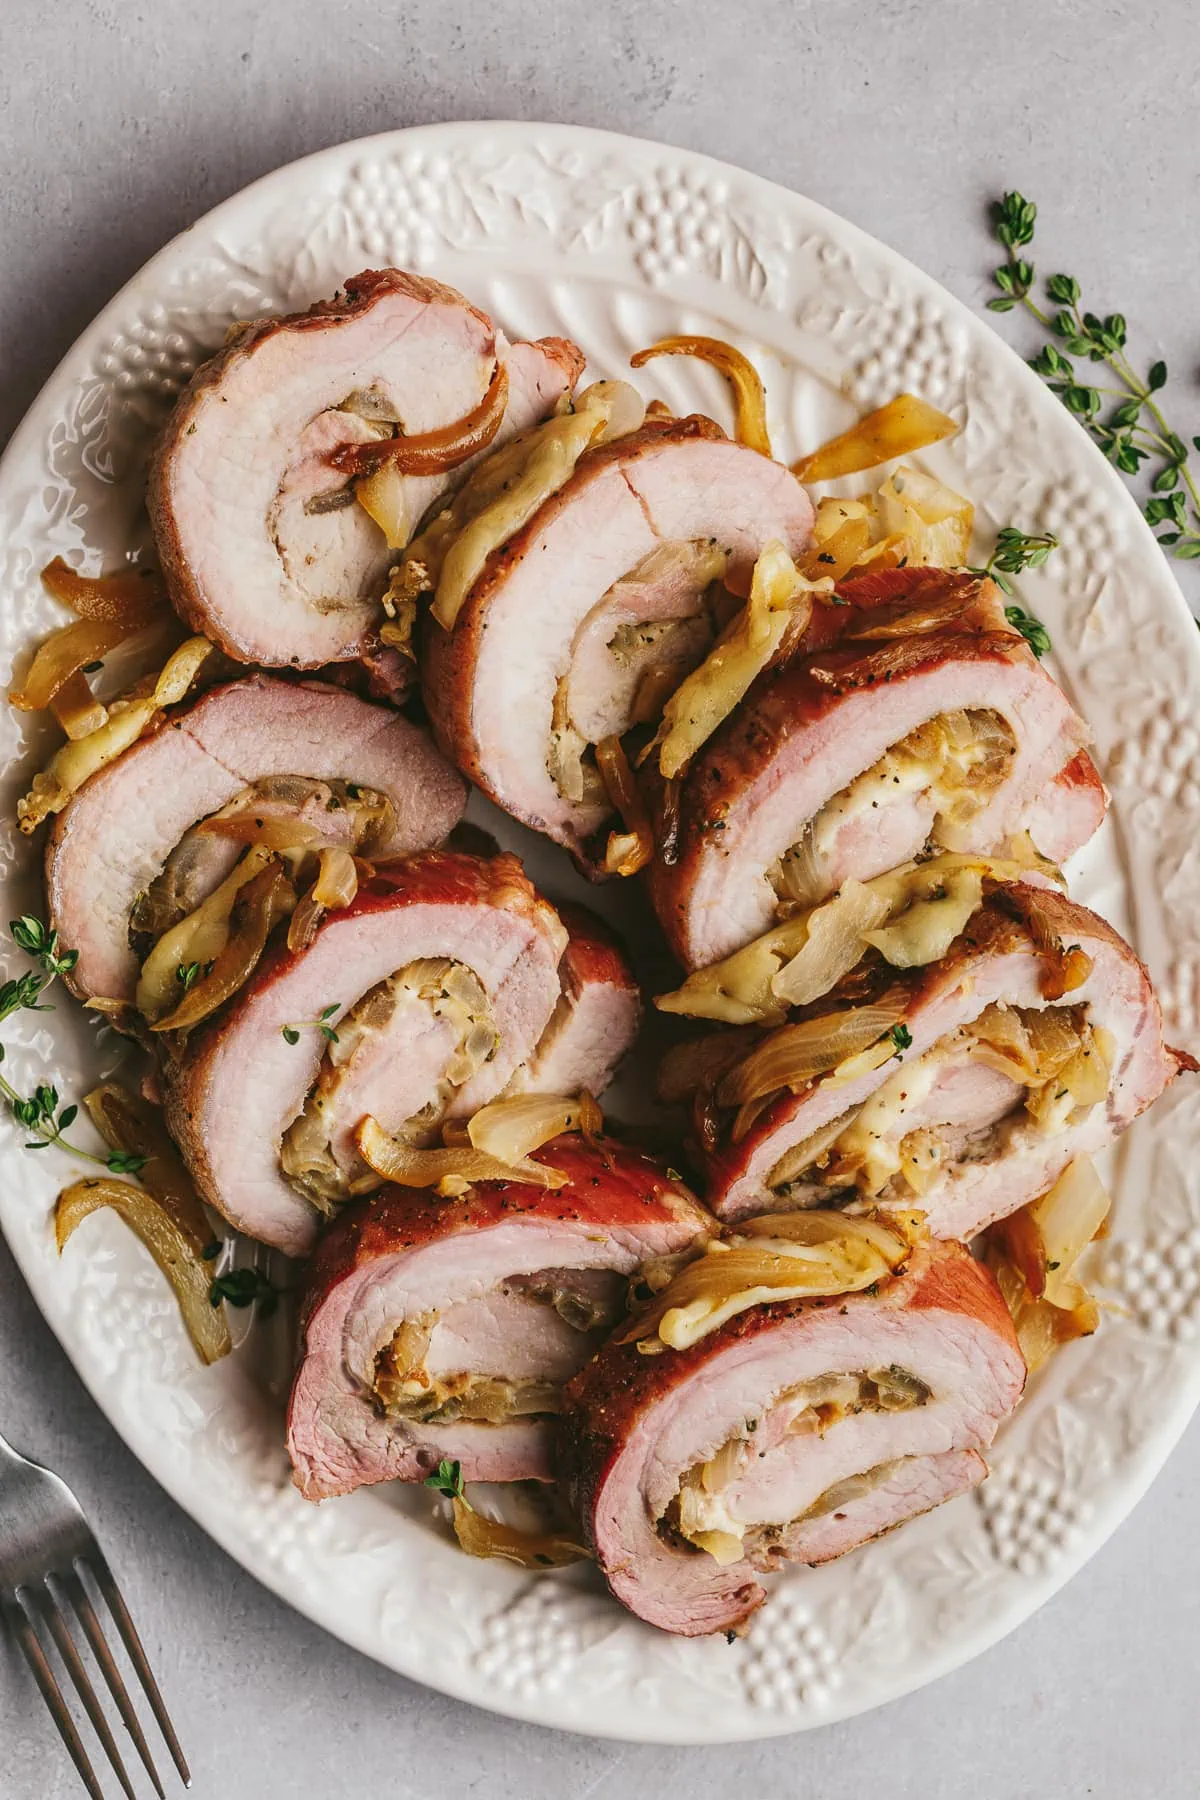 A serving platter with sliced smoked pork loin and fresh thyme as garnish.